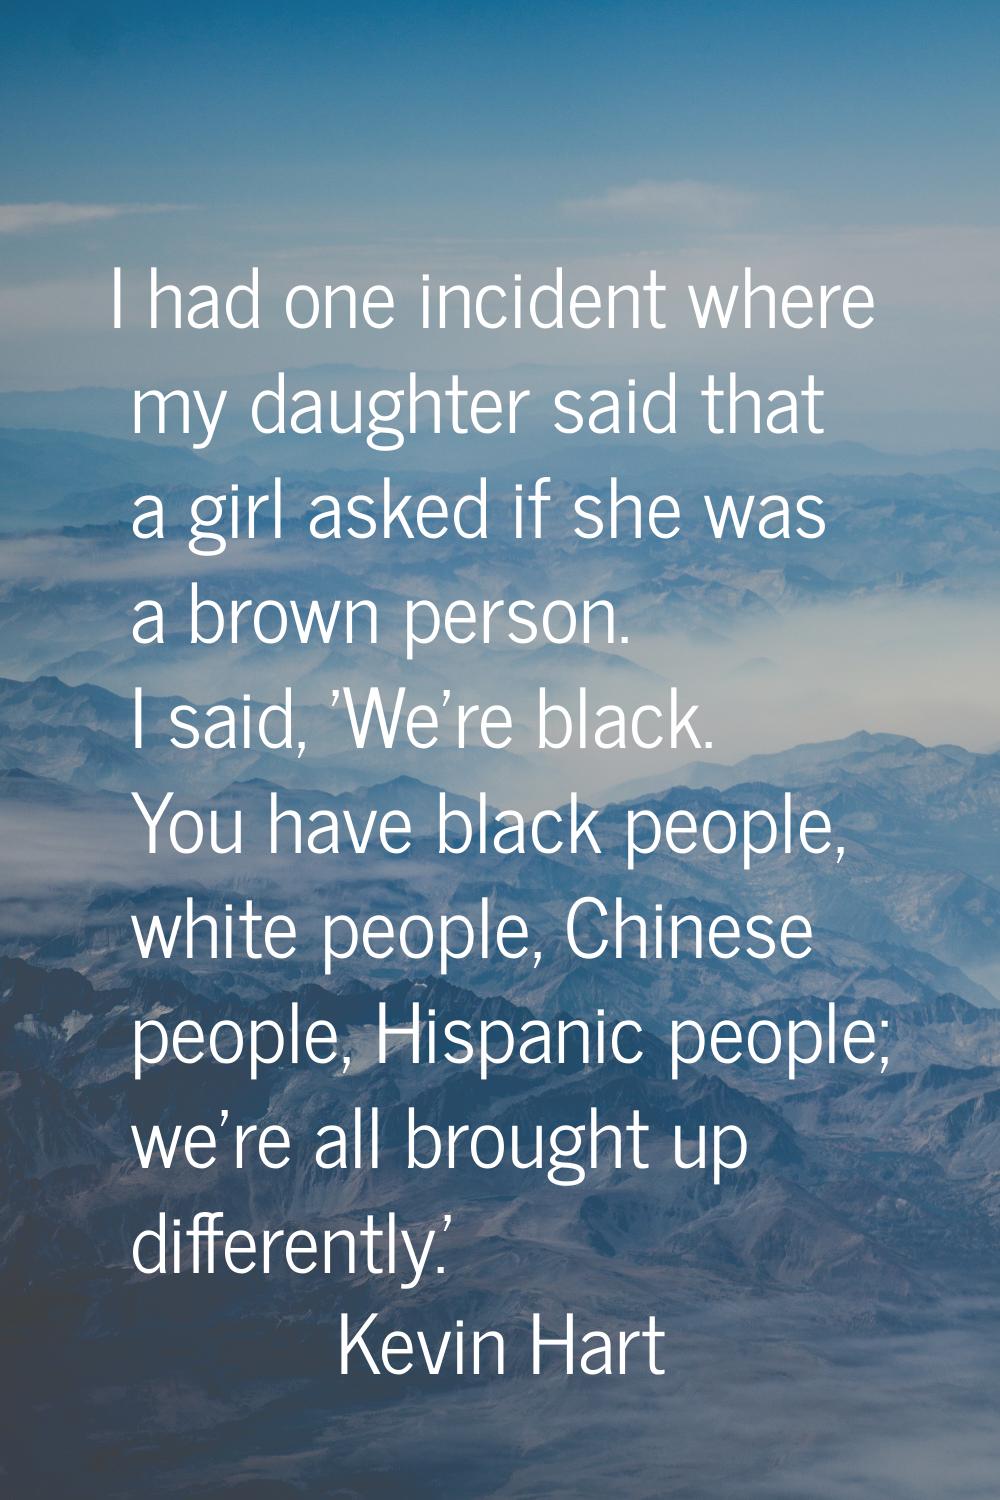 I had one incident where my daughter said that a girl asked if she was a brown person. I said, 'We'